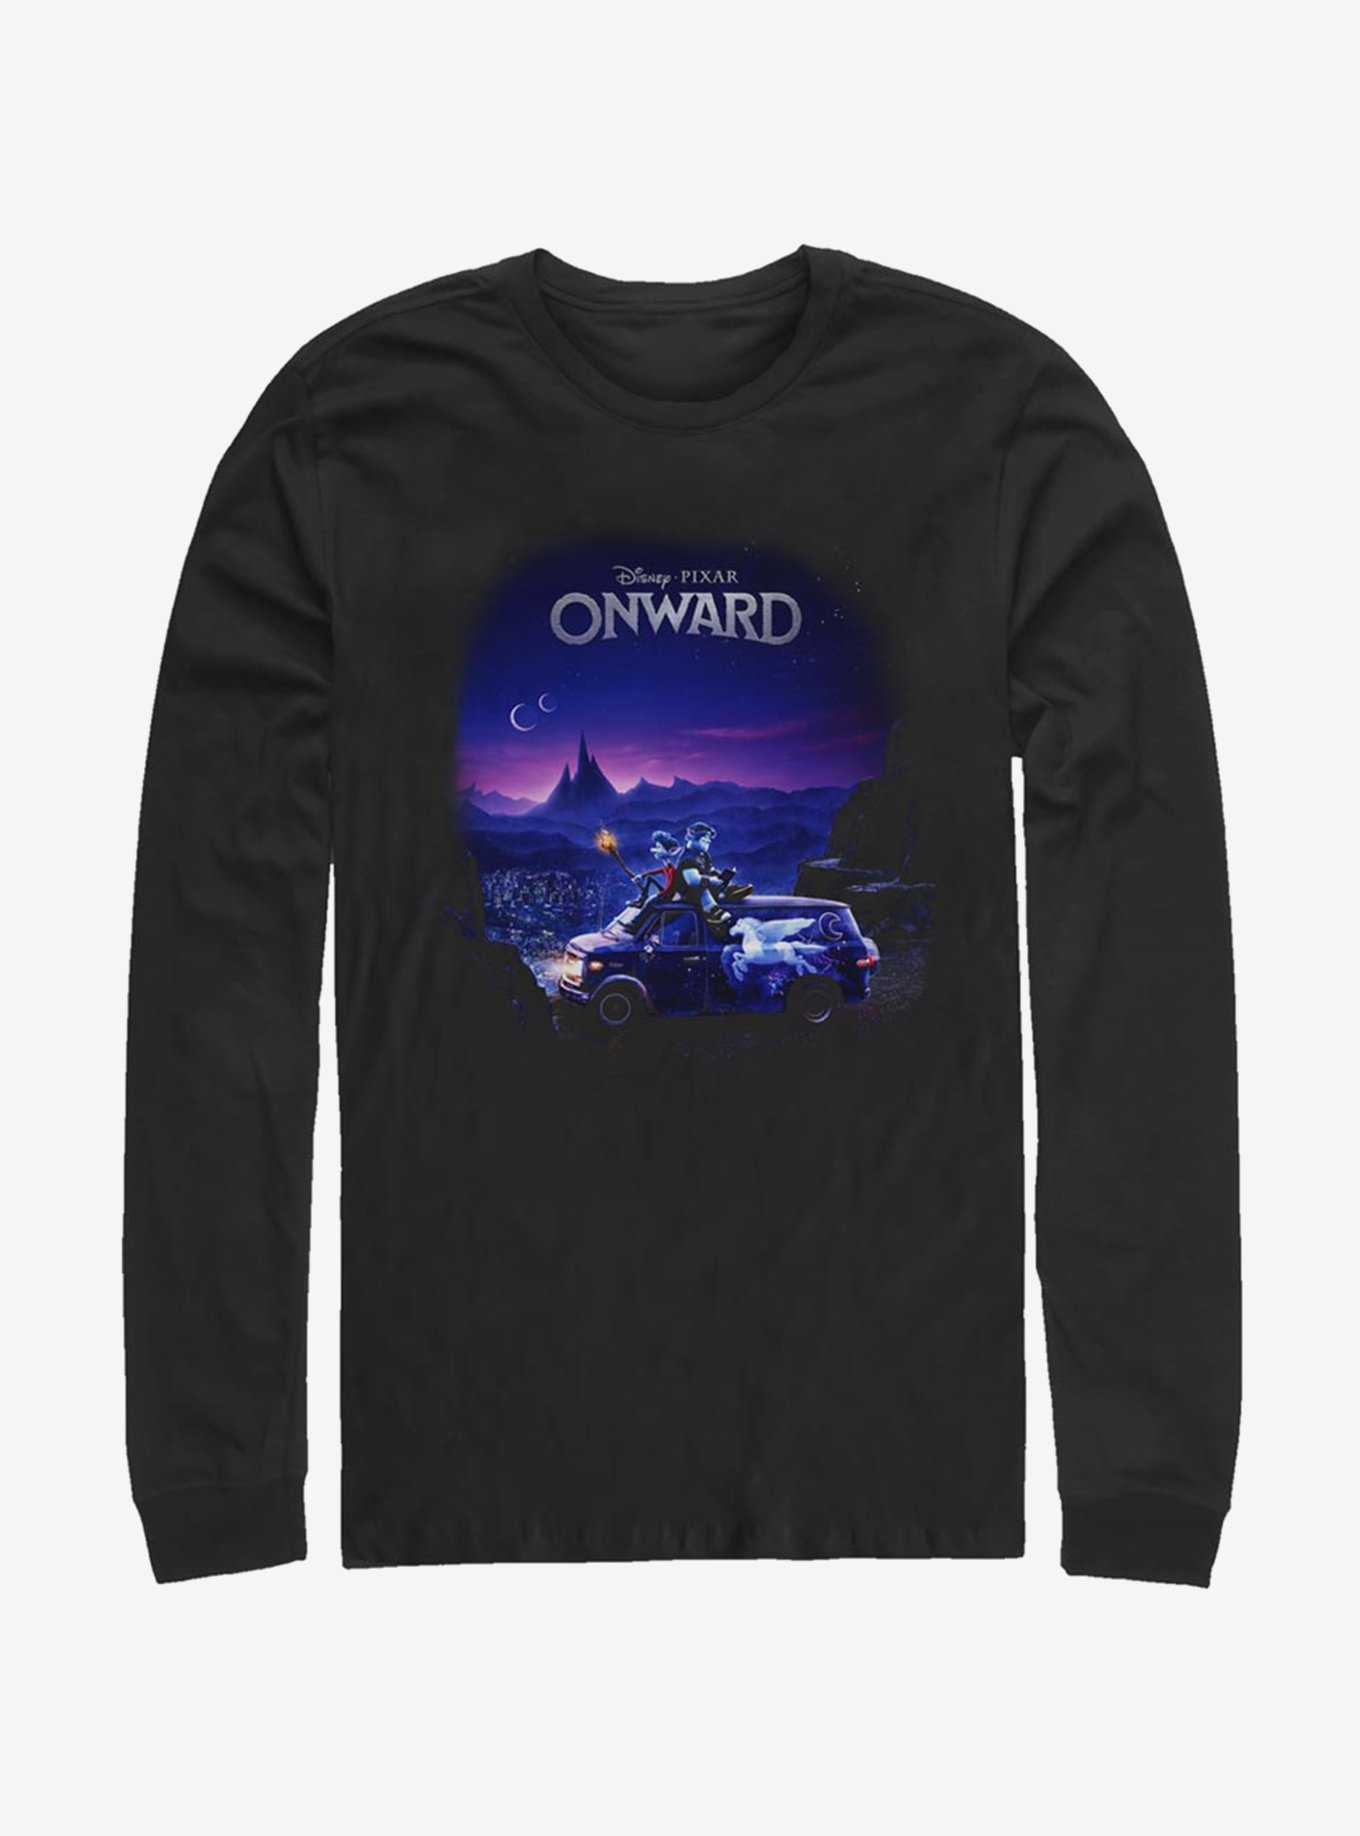 OFFICIAL Onward | Movie Hot Merchandise & Topic T-Shirts